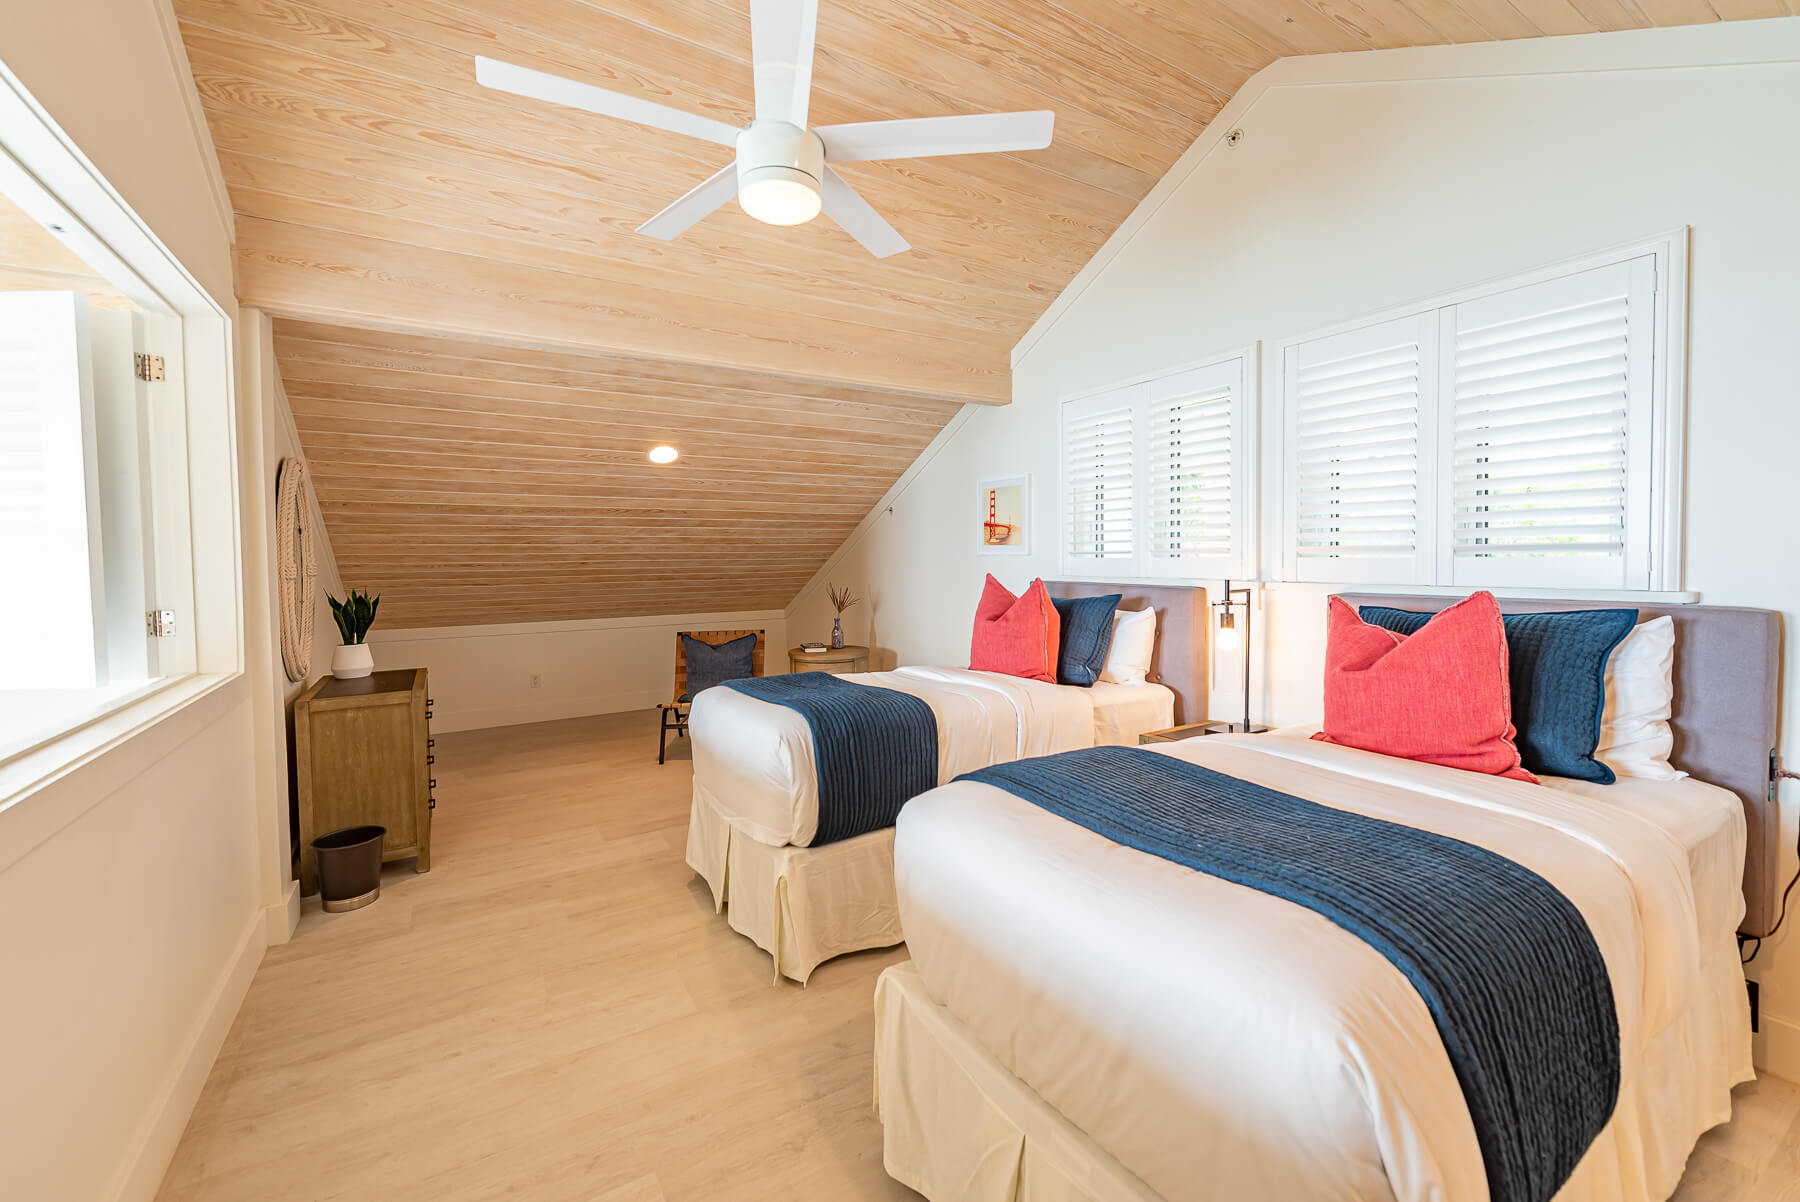 A twin bedroom at The Abaco Club, embodying the tranquil lifestyle of Bahamian coastal living